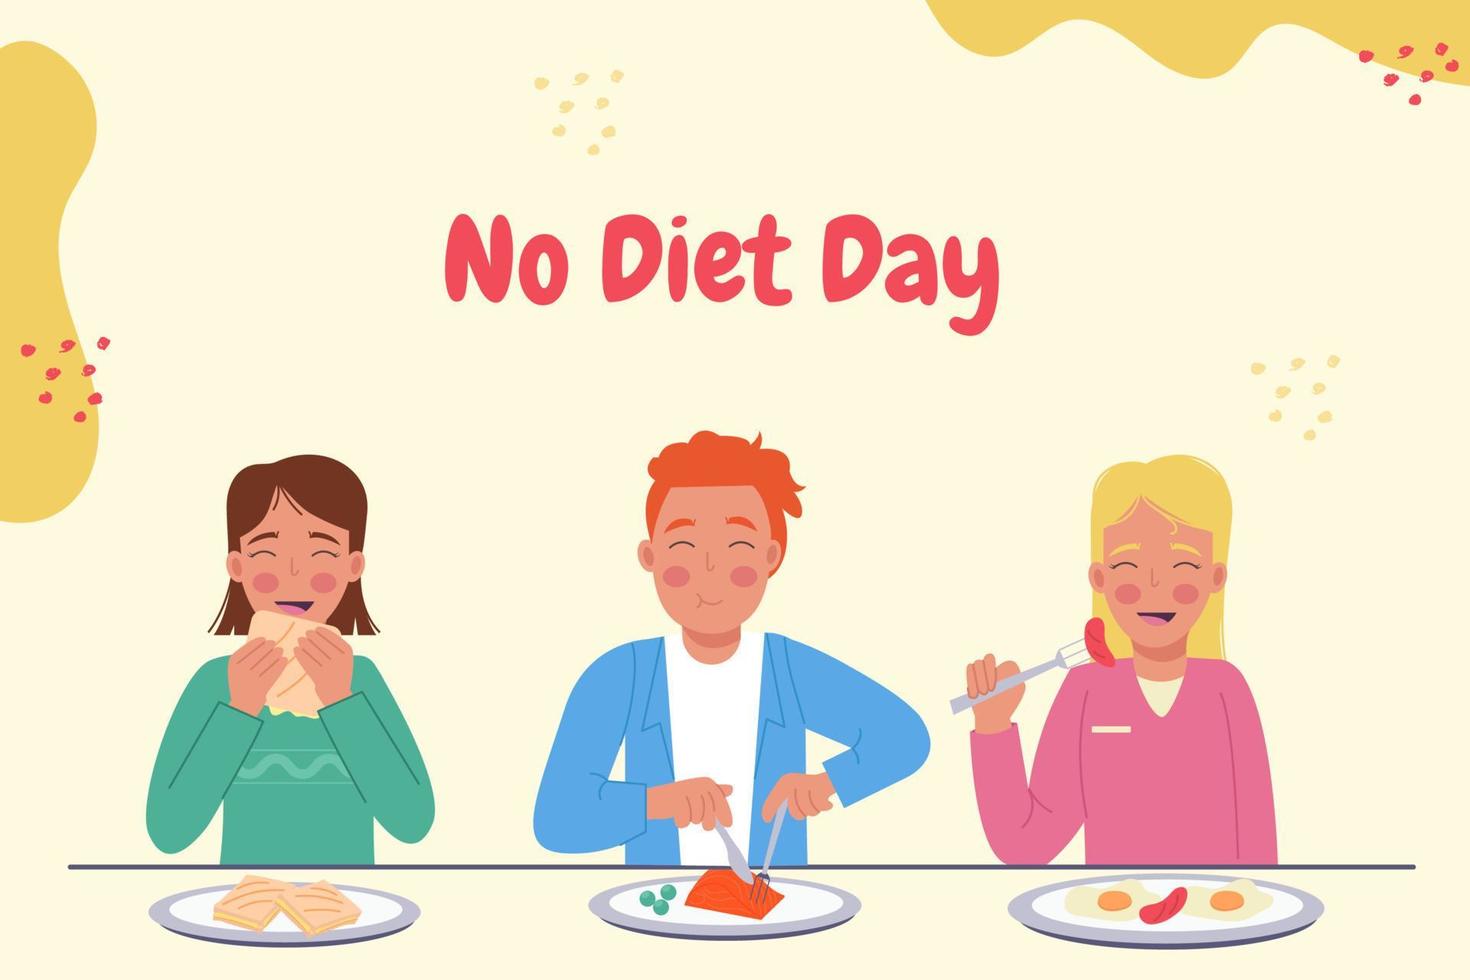 No diet day. Women and man eating at the table vector